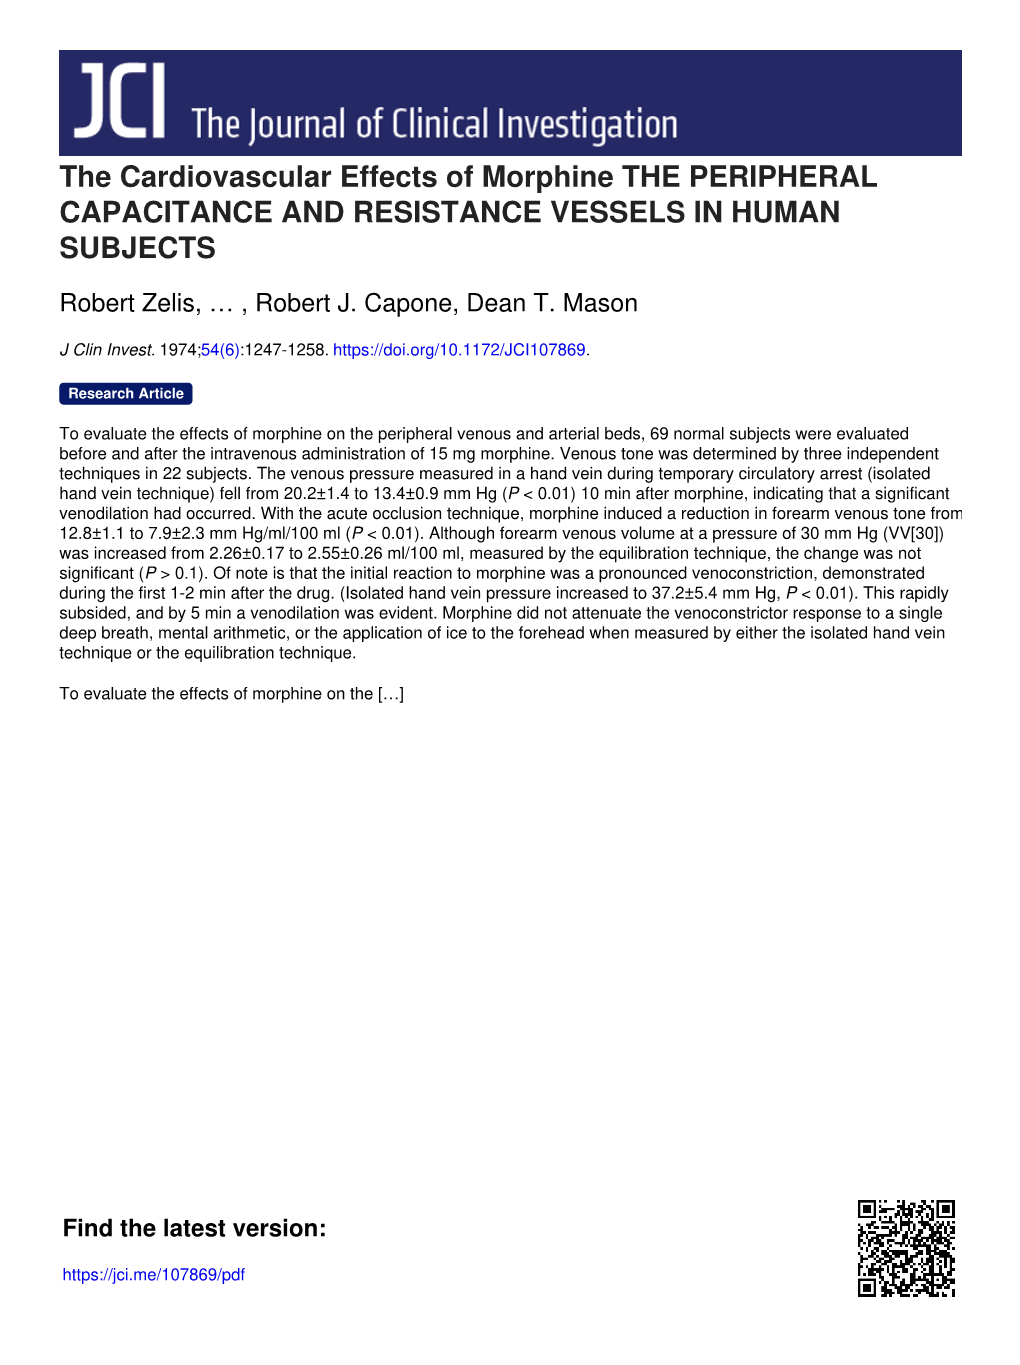 The Cardiovascular Effects of Morphine the PERIPHERAL CAPACITANCE and RESISTANCE VESSELS in HUMAN SUBJECTS